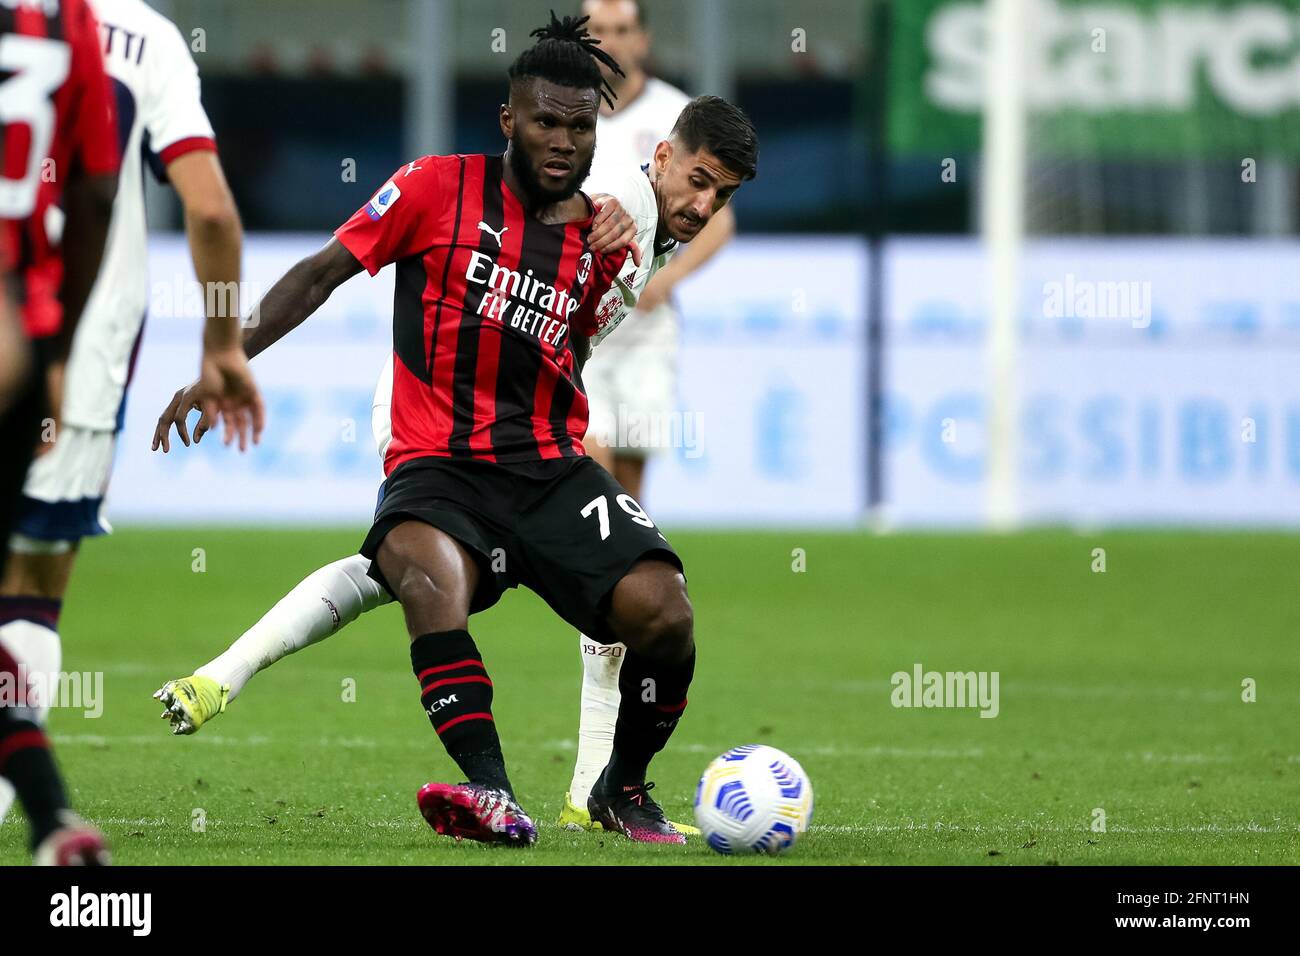 MILAN, ITALY - MAY 16: Kessie of AC Milan and Simone Pinna of Calcio during the Serie A match between Milan and Cagliari Calcio at Stock Photo - Alamy